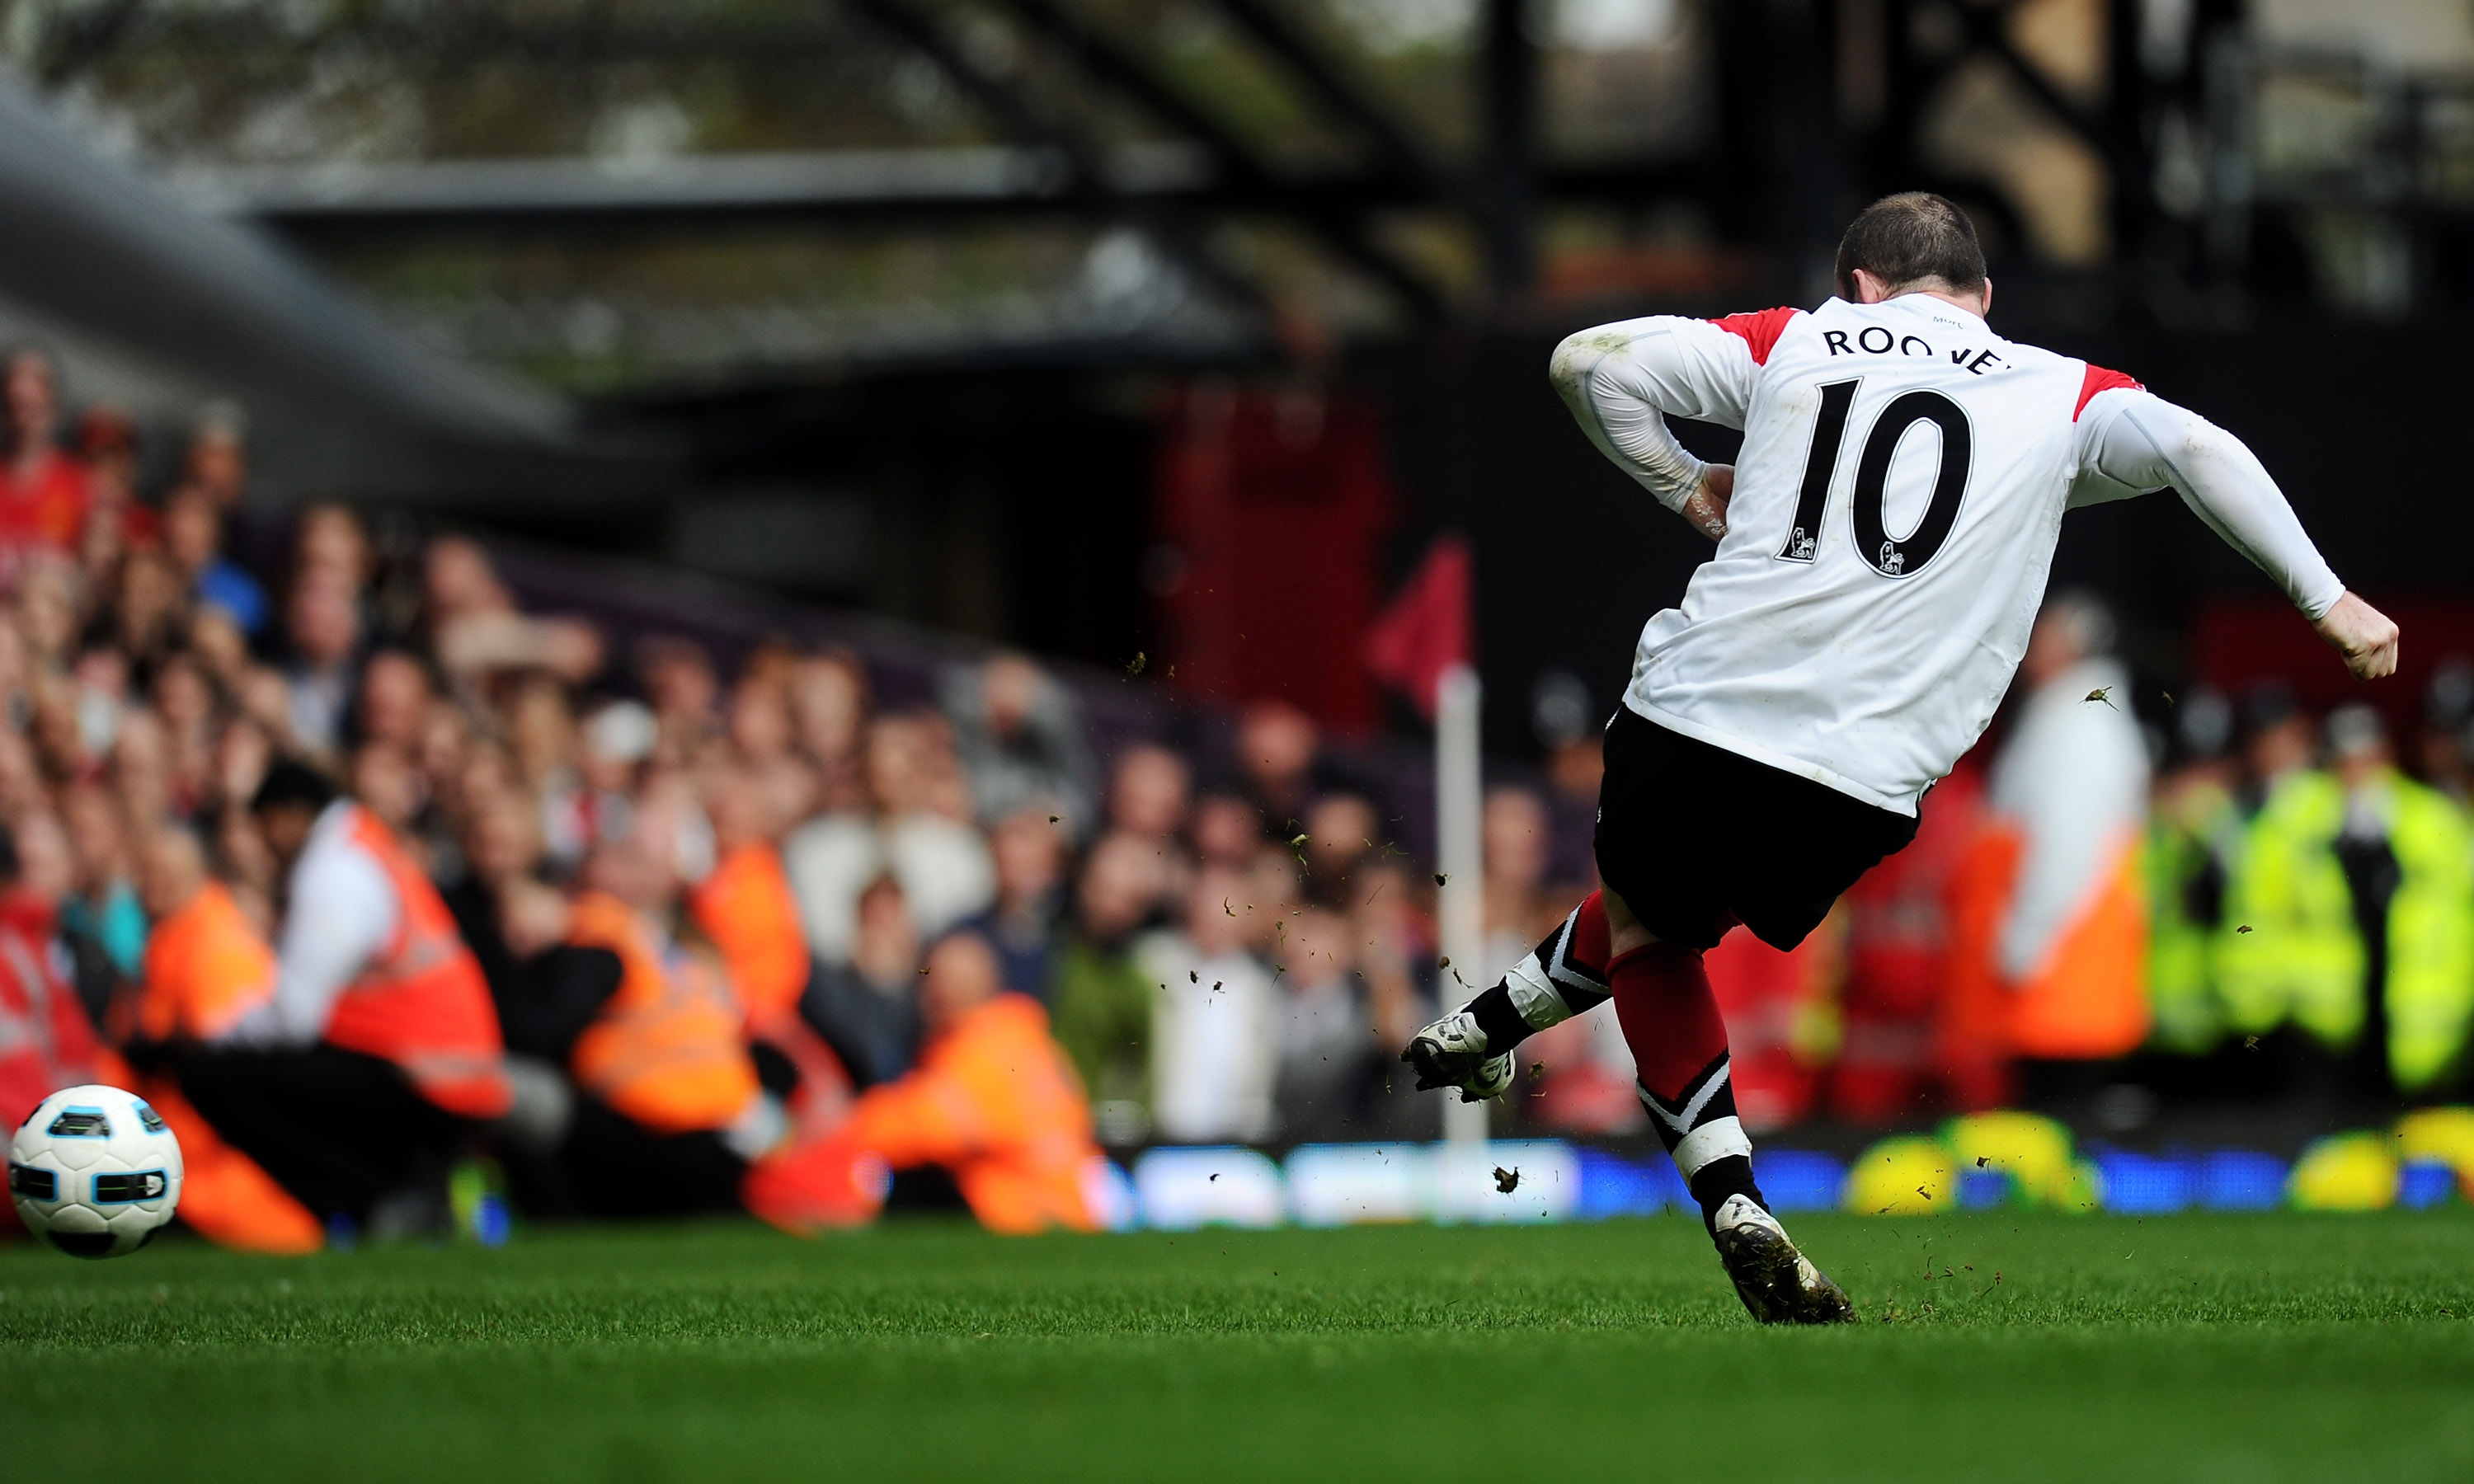 LONDON, ENGLAND - APRIL 02:  Wayne Rooney of Manchester United scores his hat trick goal from the penalty spot during the Barclays Premier League match between West Ham United and Manchester United at the Boleyn Ground on April 2, 2011 in London, England.